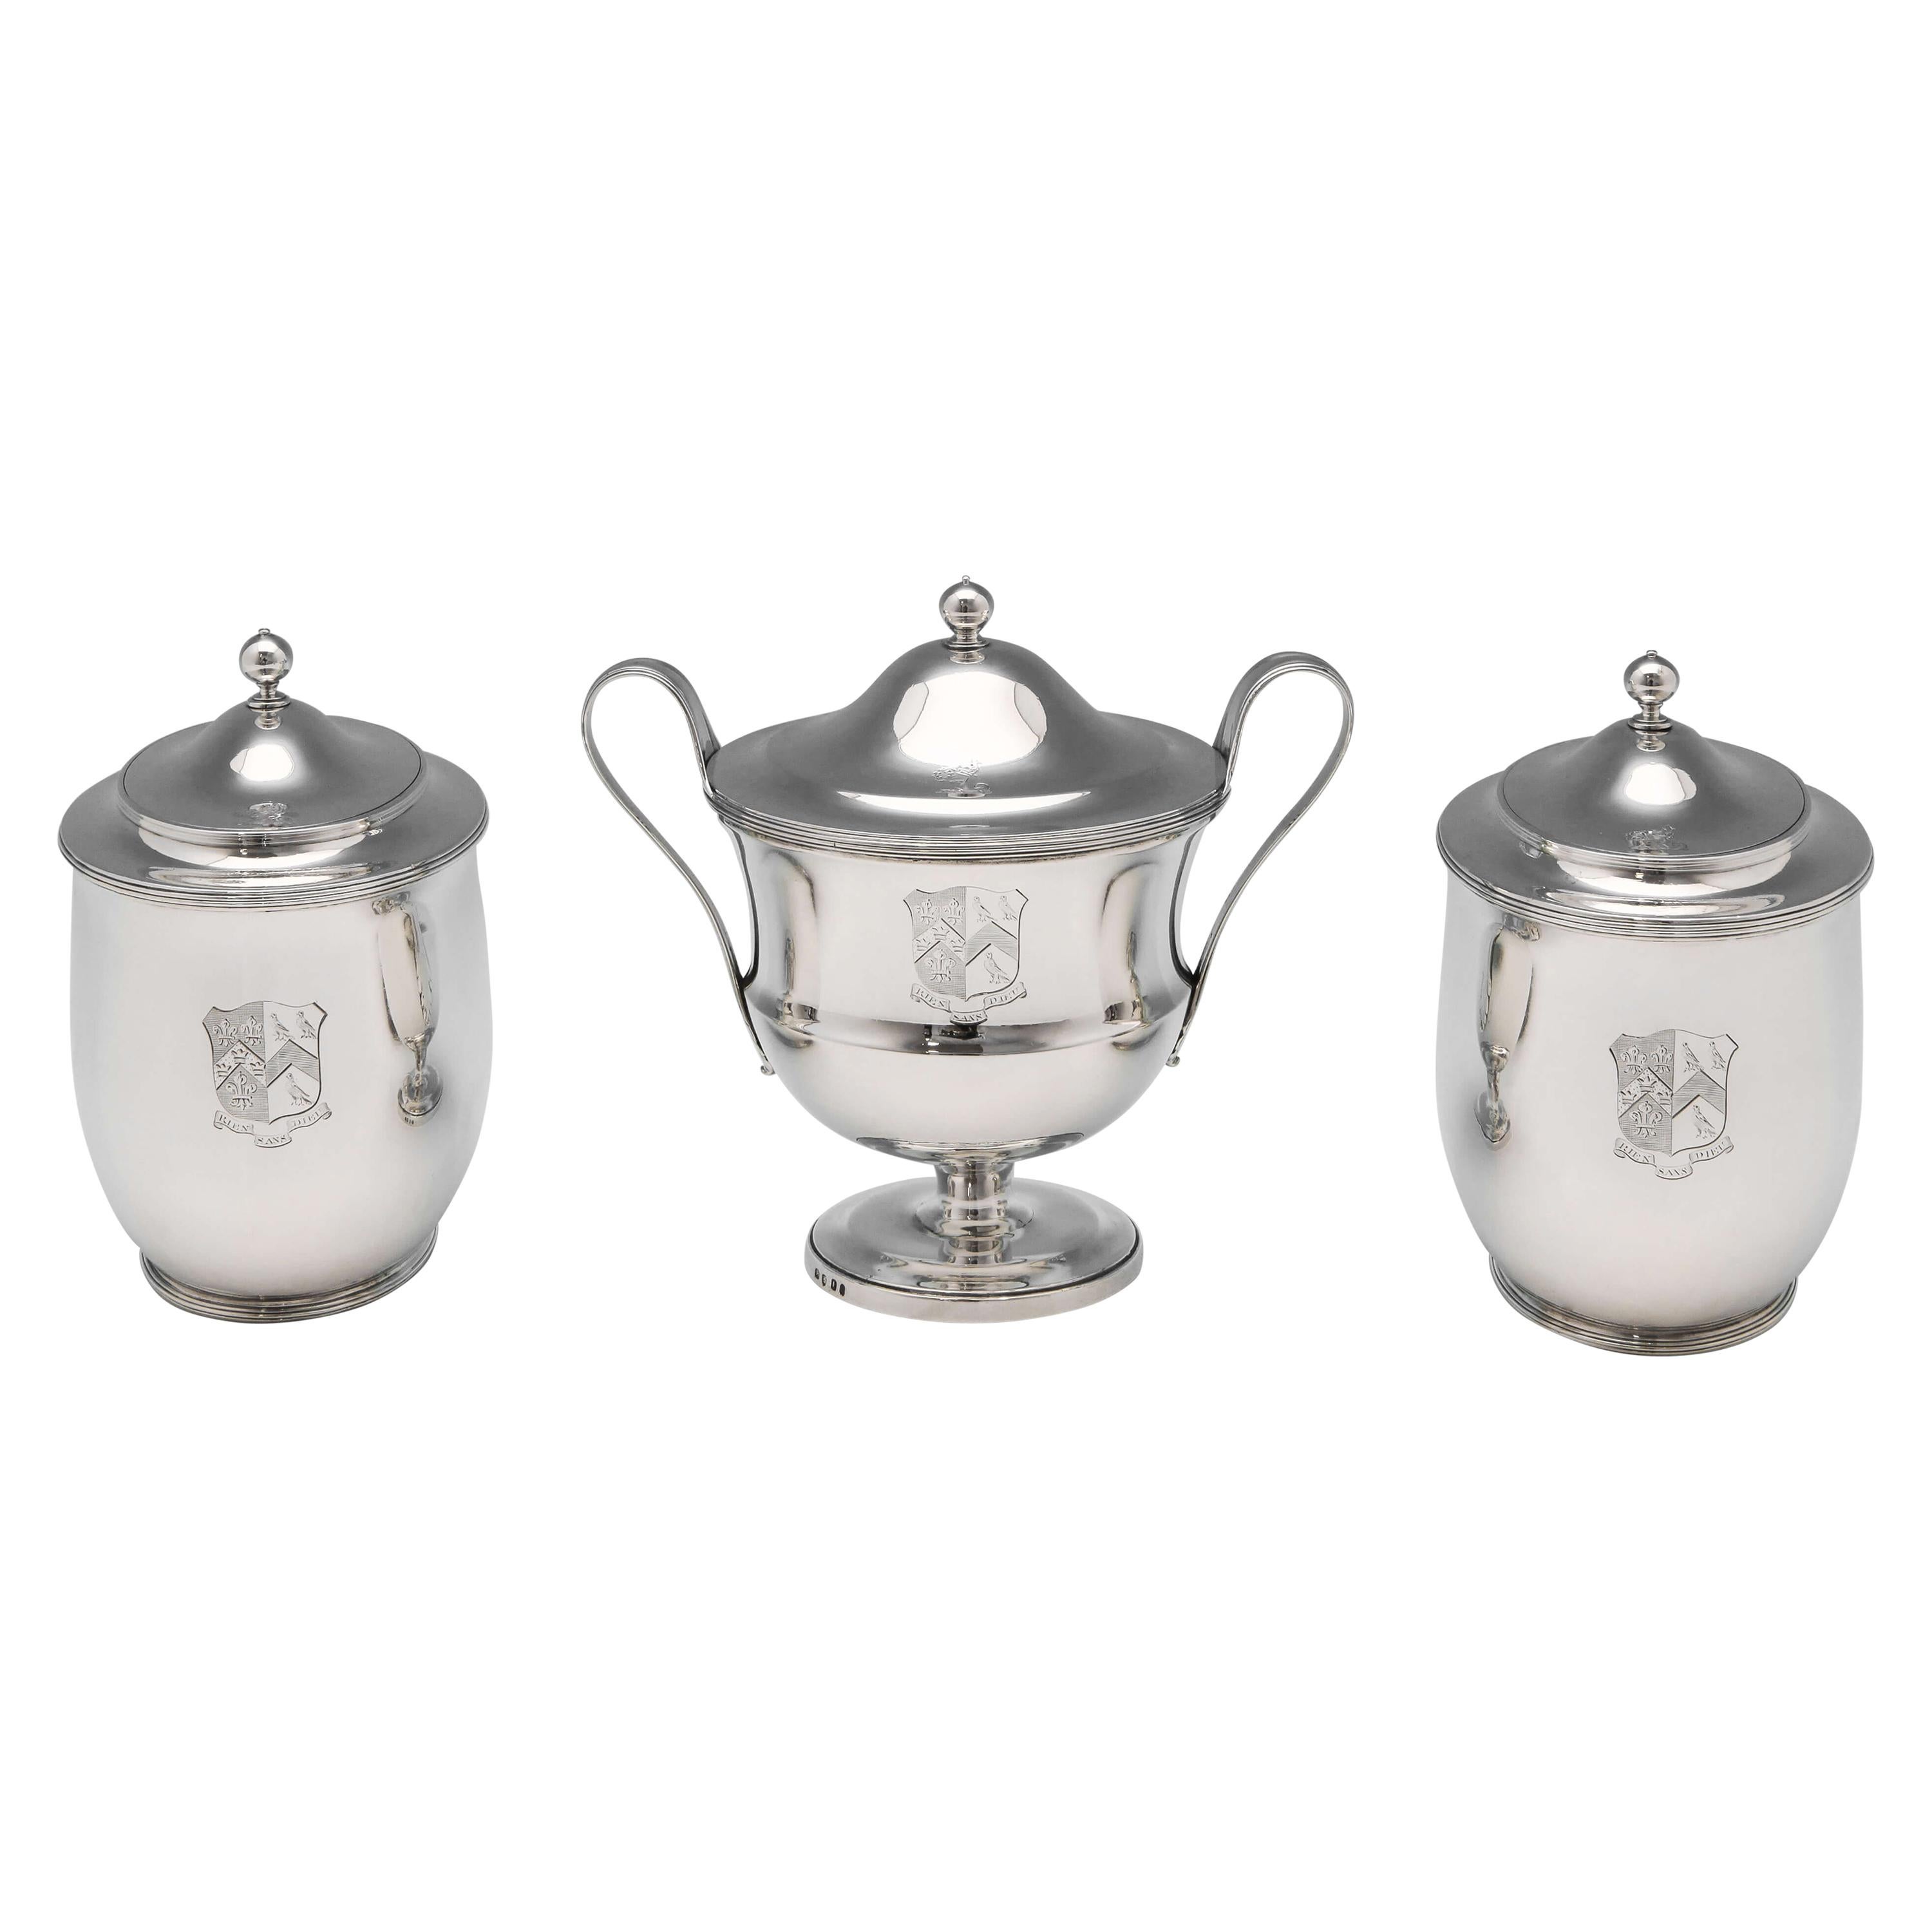 Neoclassical Antique Sterling Silver Tea Caddy Set from 1797 by Robert Sharp